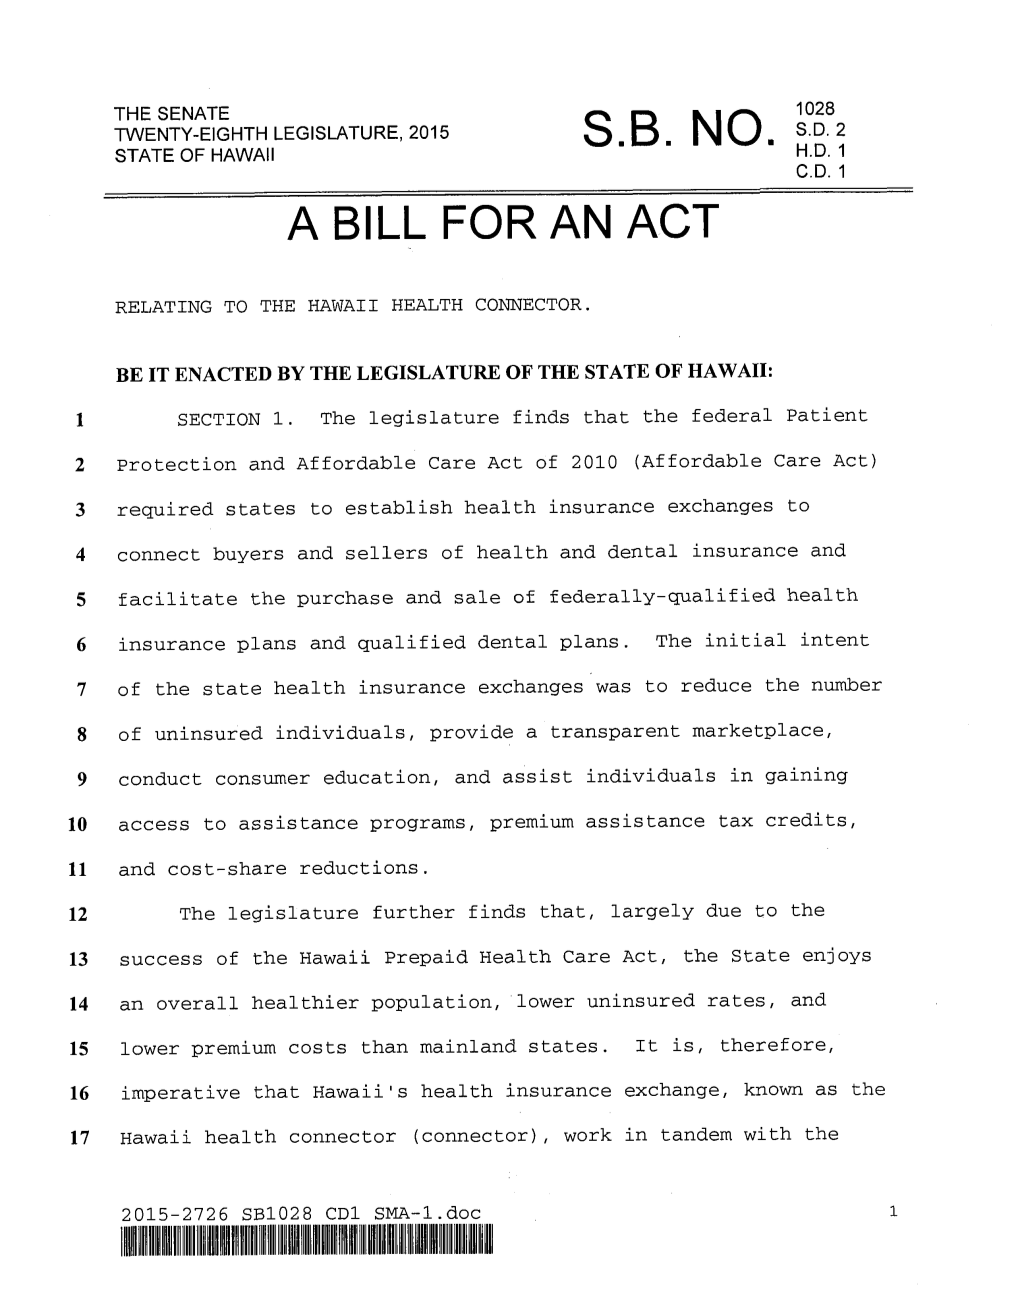 A Bill for an Act